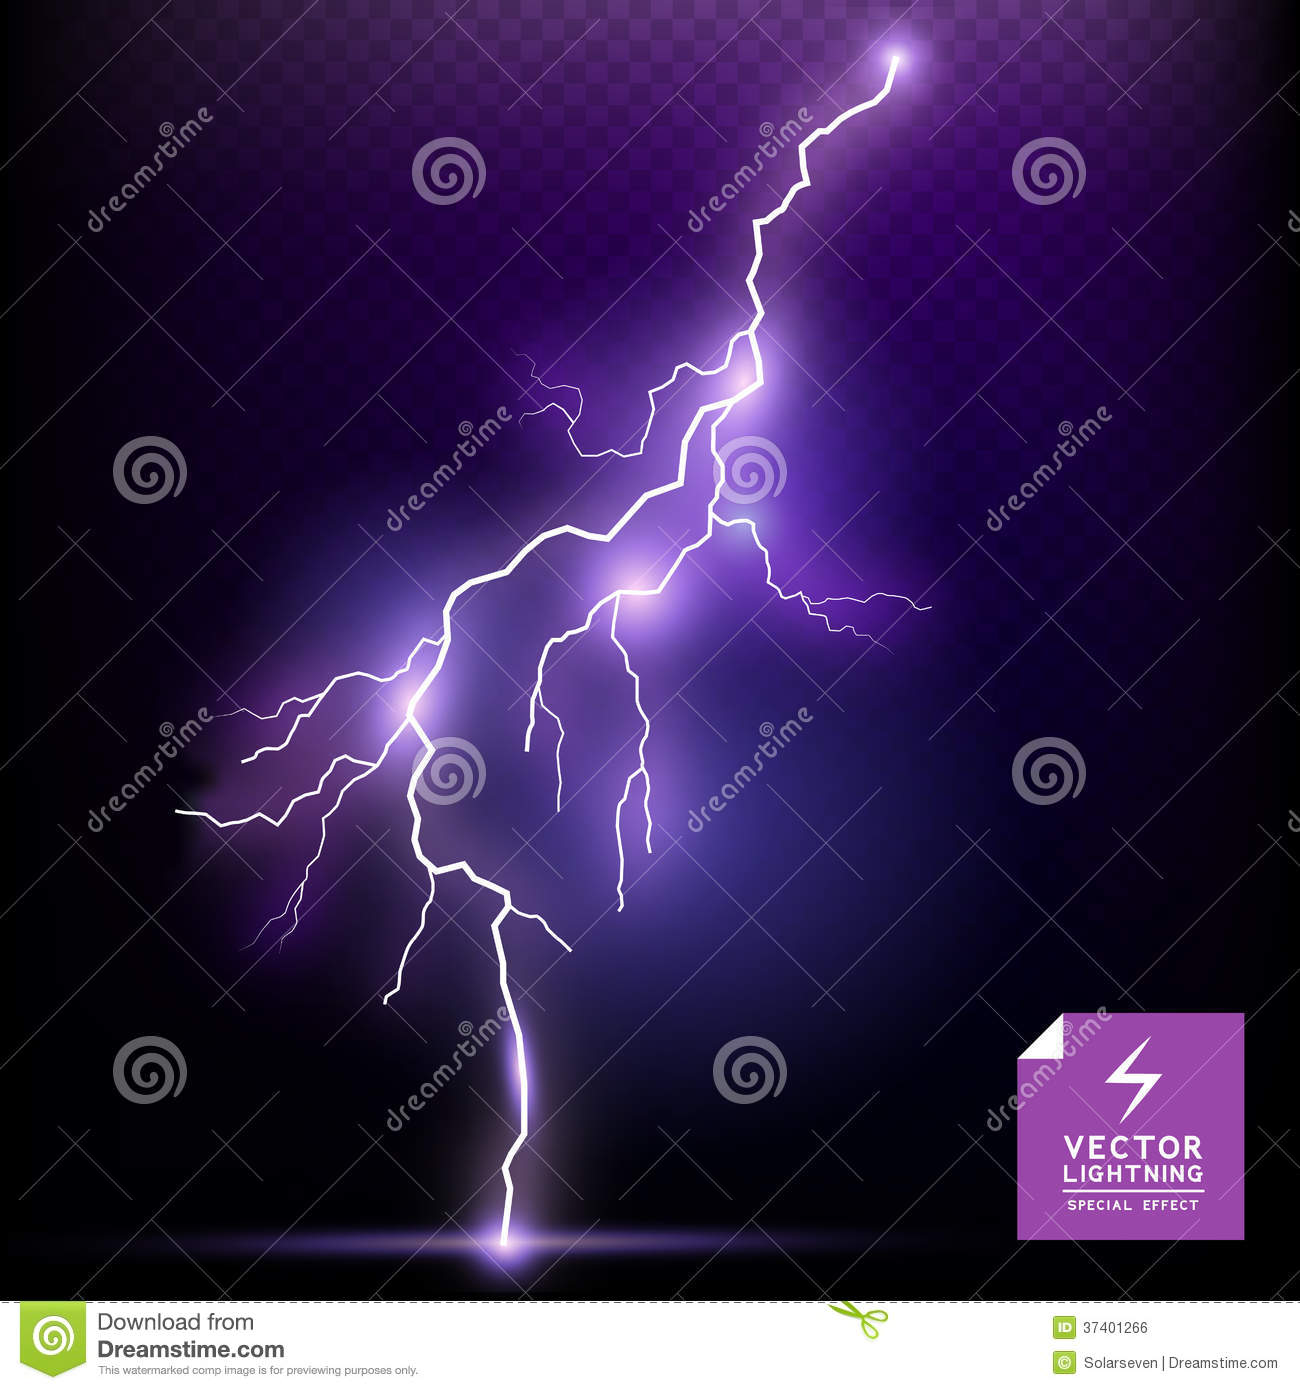 Lightning Special Effects